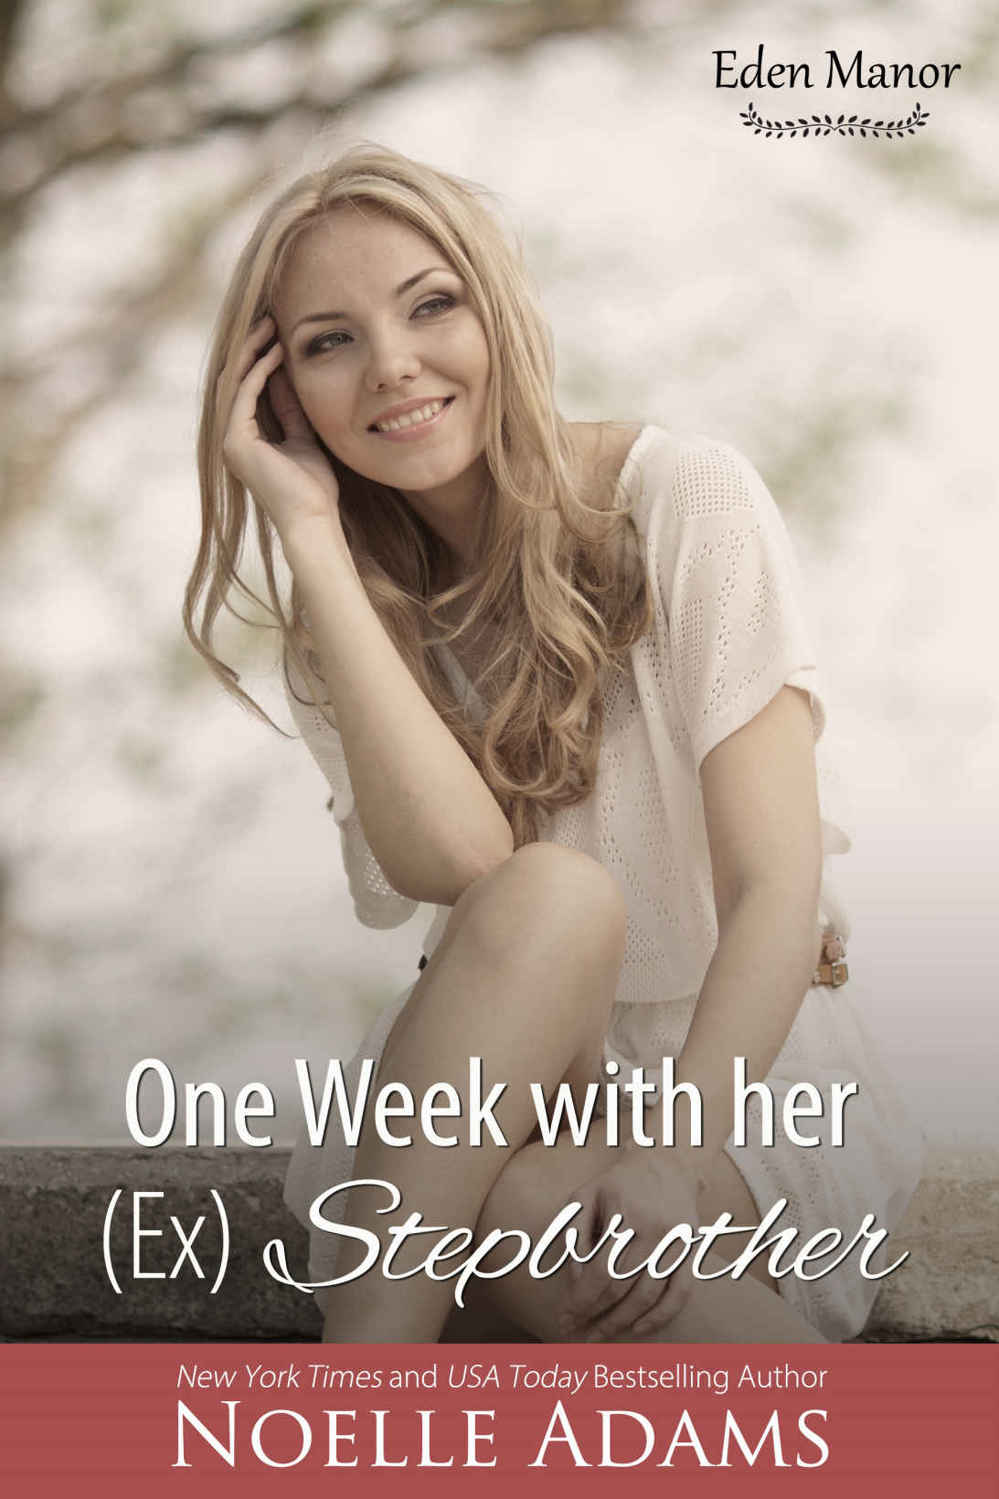 One Week with her (Ex) Stepbrother (Eden Manor #2)